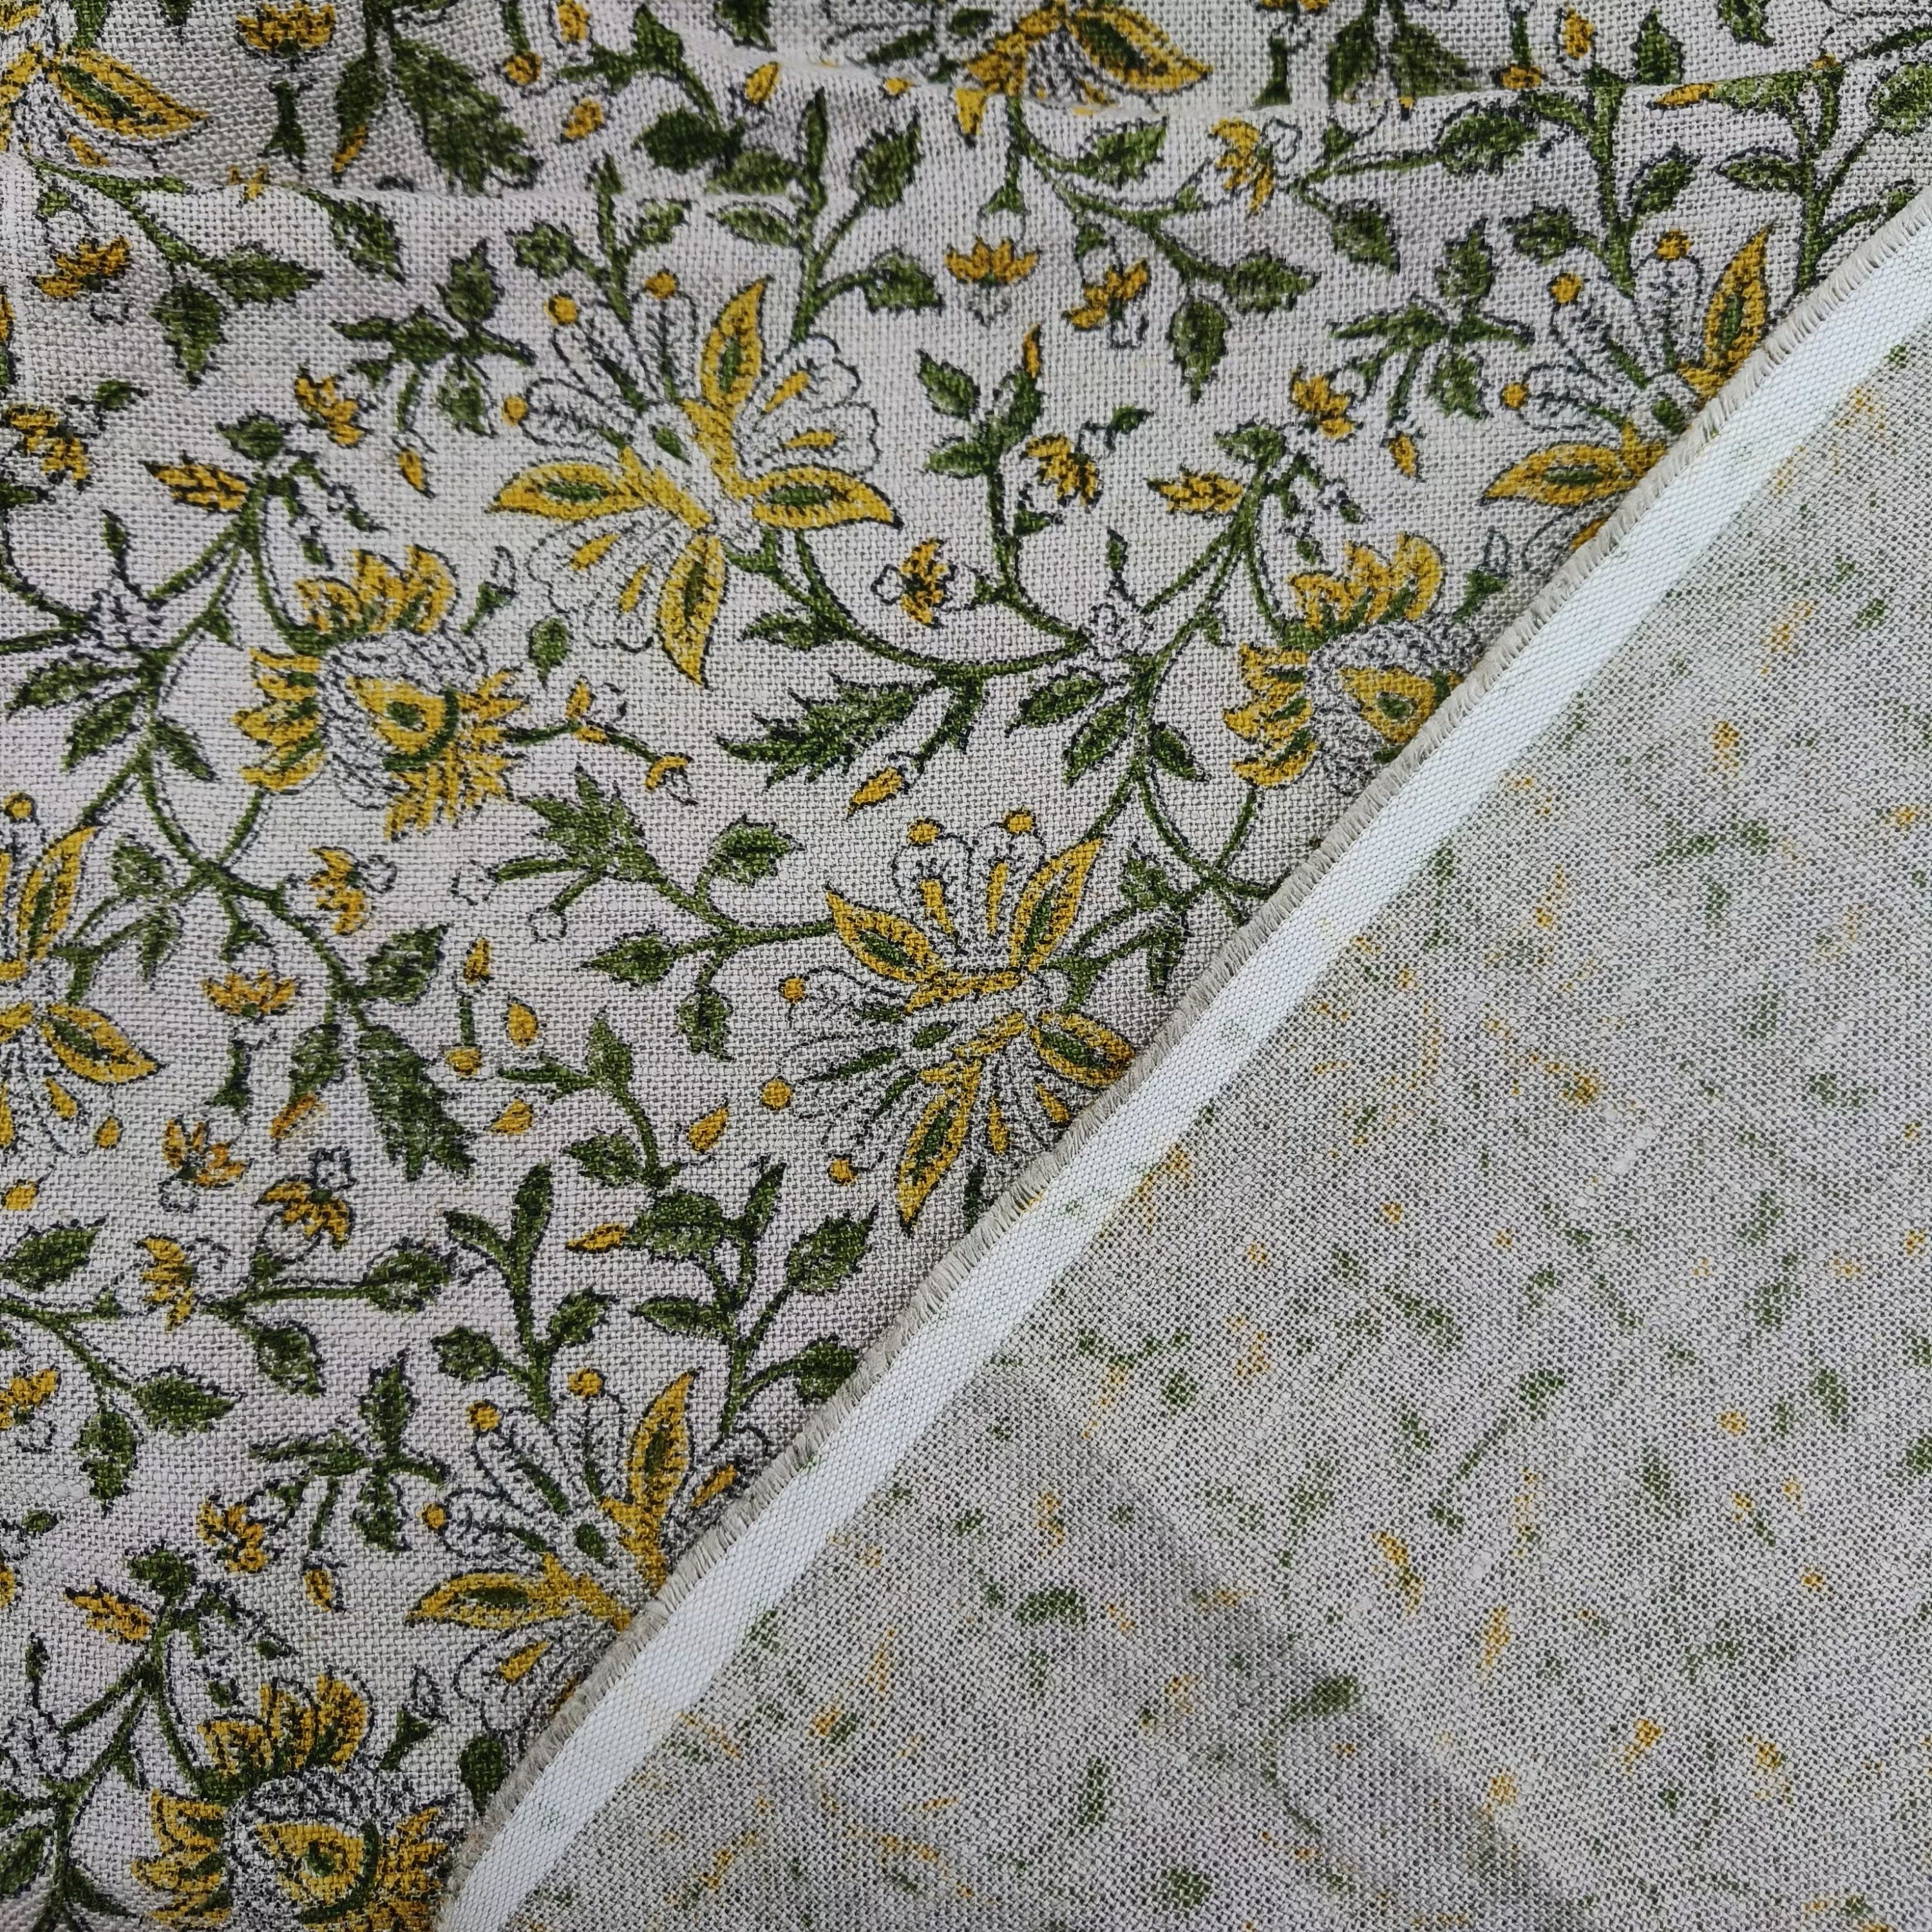 Jhalawar  Most Popular Block Print Fabric In Summers  Best For Upholstery, Cushion Cover, Sofa/Chair Cover, And Other Crafts